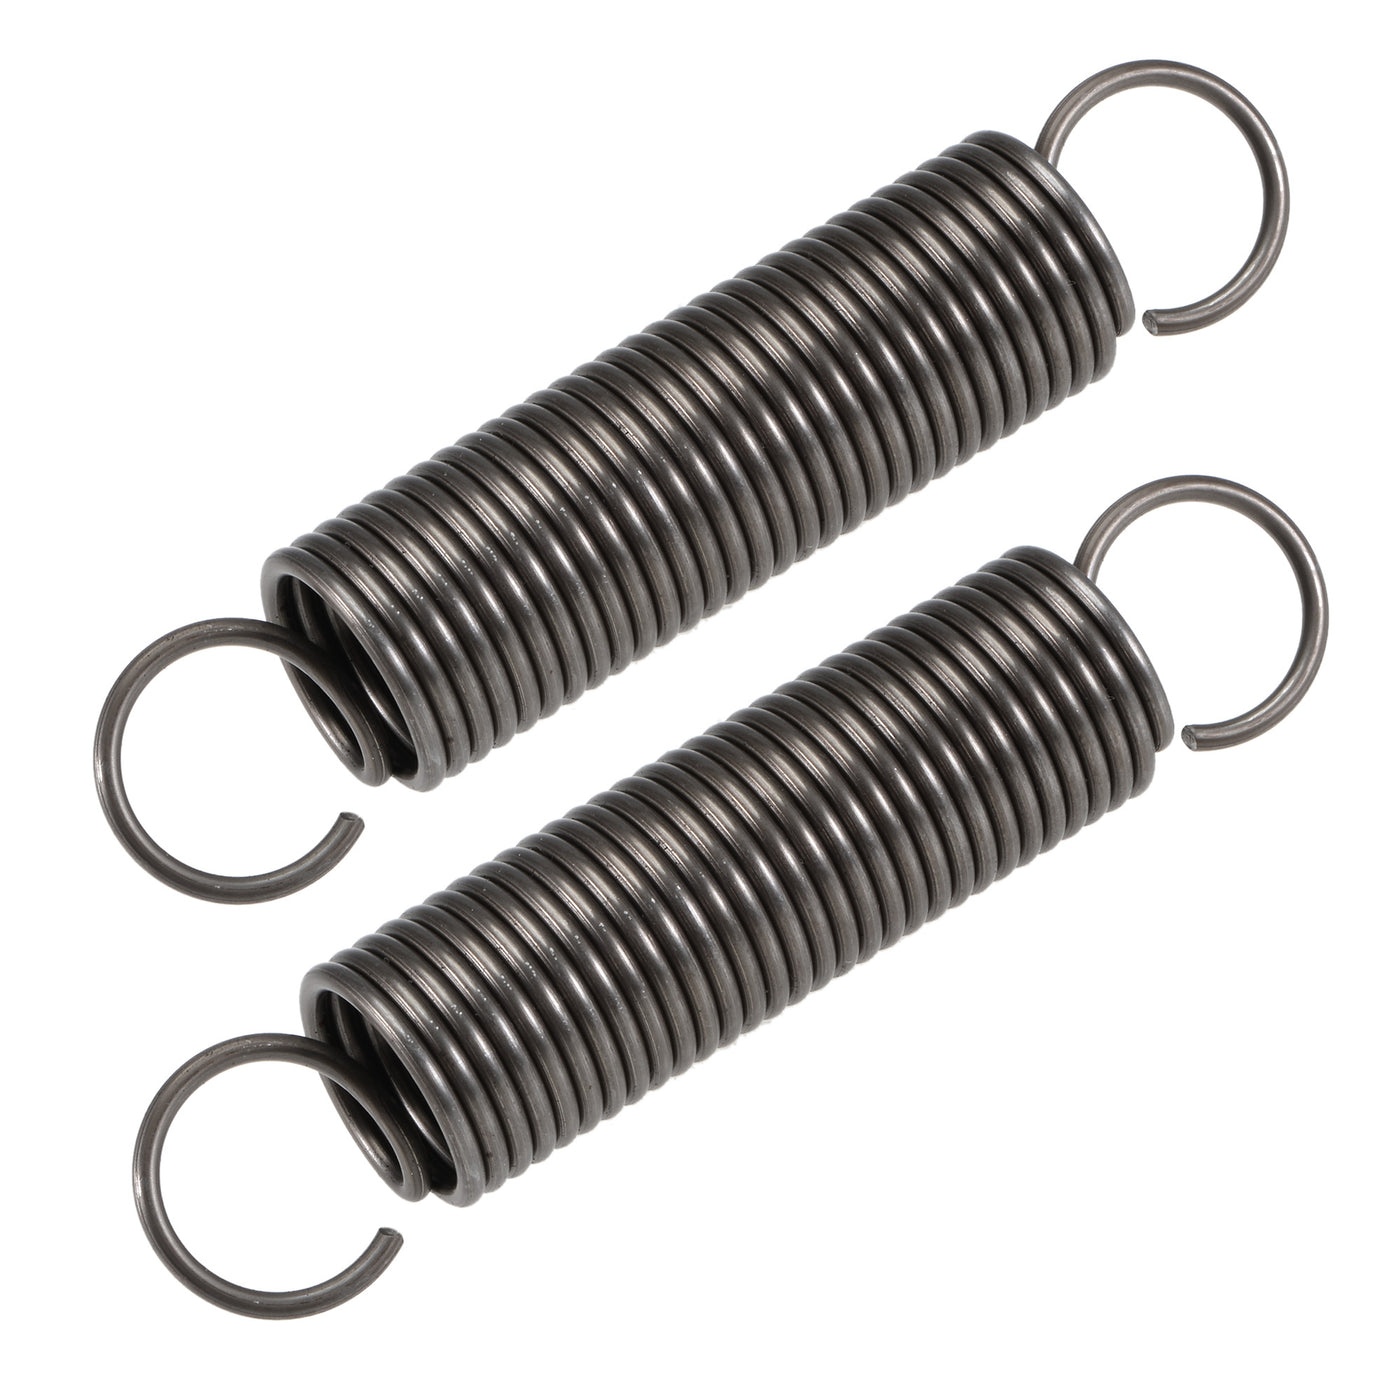 Uxcell Uxcell 2mmx20mmx120mm Extended Compression Spring ,17.3Lbs Load Capacity,Grey 2pcs